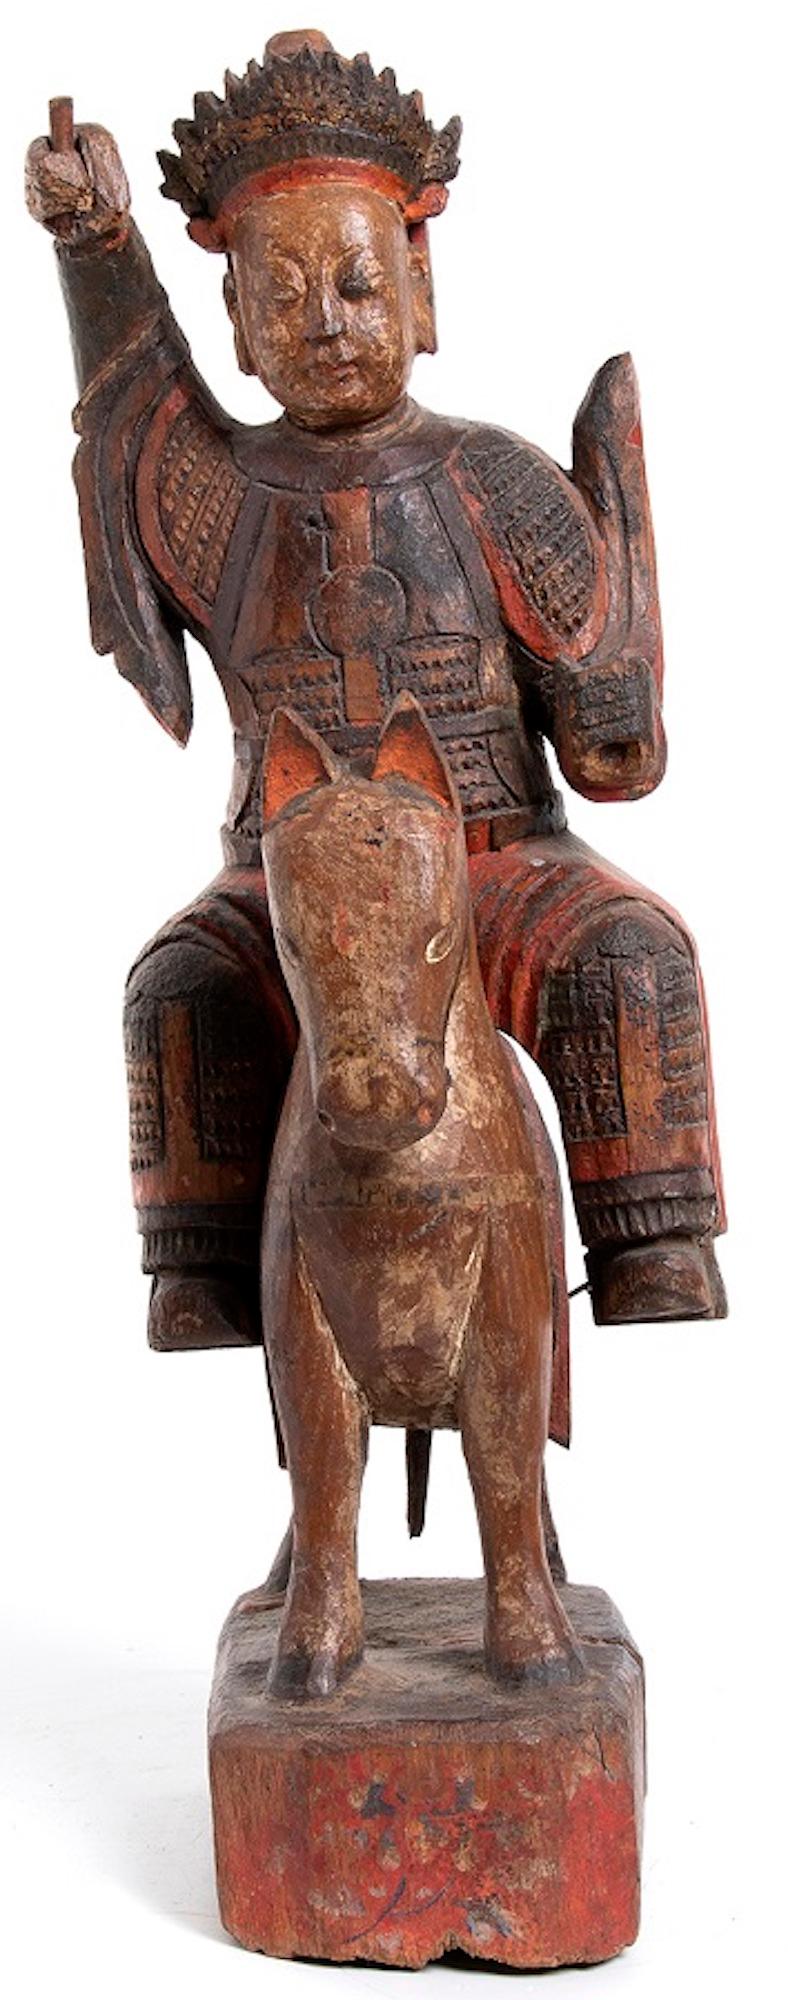 Hand-Carved Ancient Deity on Horse, Qing Dynasty, China